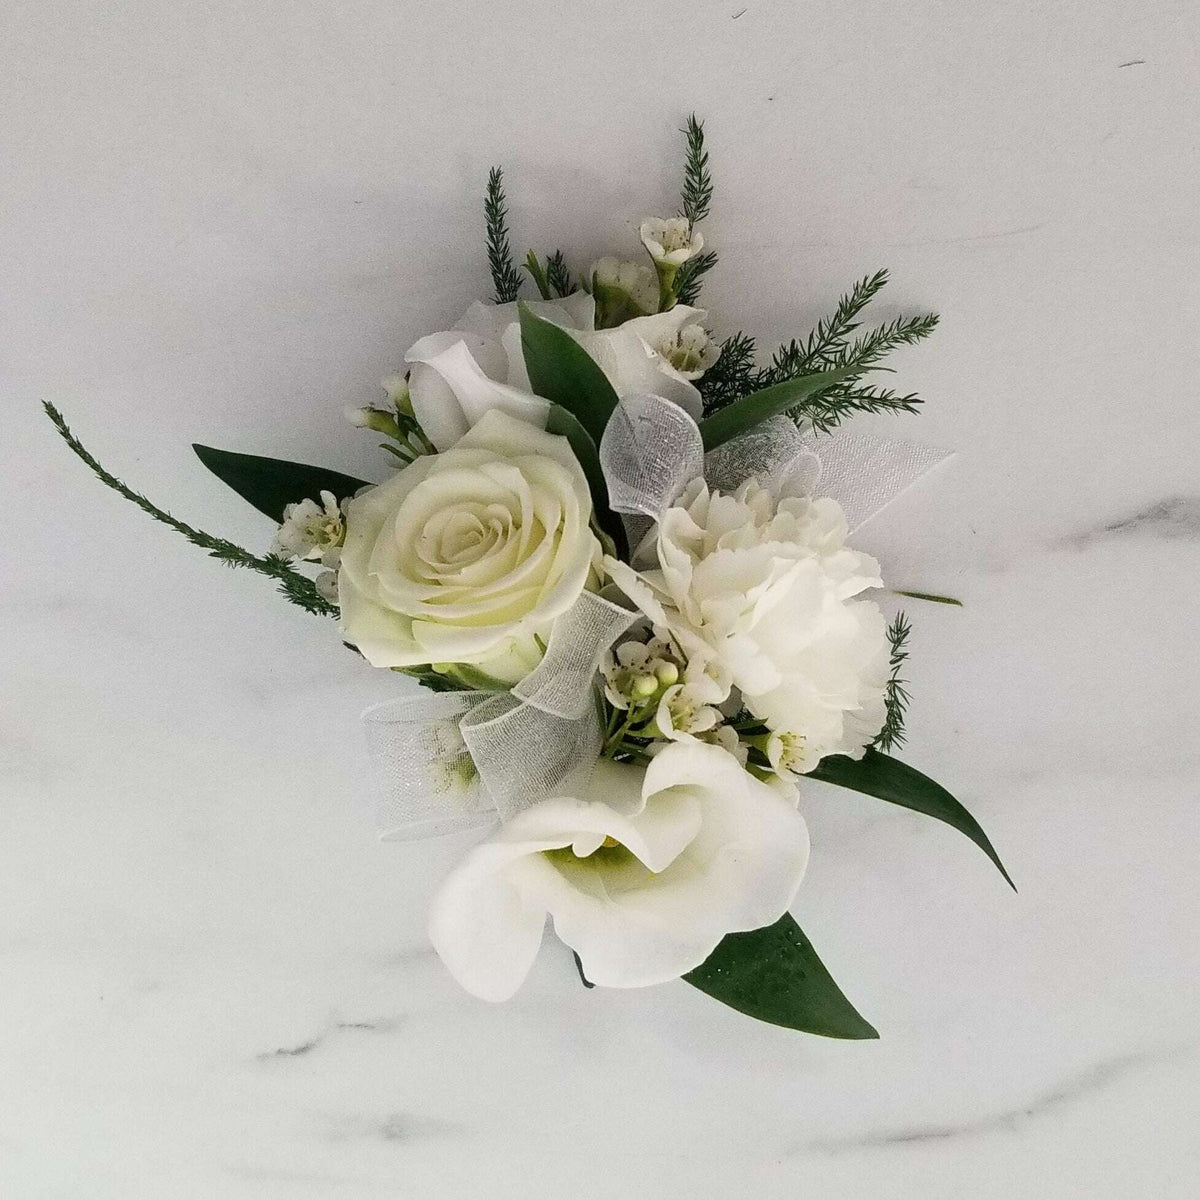 Mixed Blooms Corsage/Boutonniere_Small [3 Blooms] / White / No Glam_Flower Arrangement_The Floral Fixx_The Floral Fixx